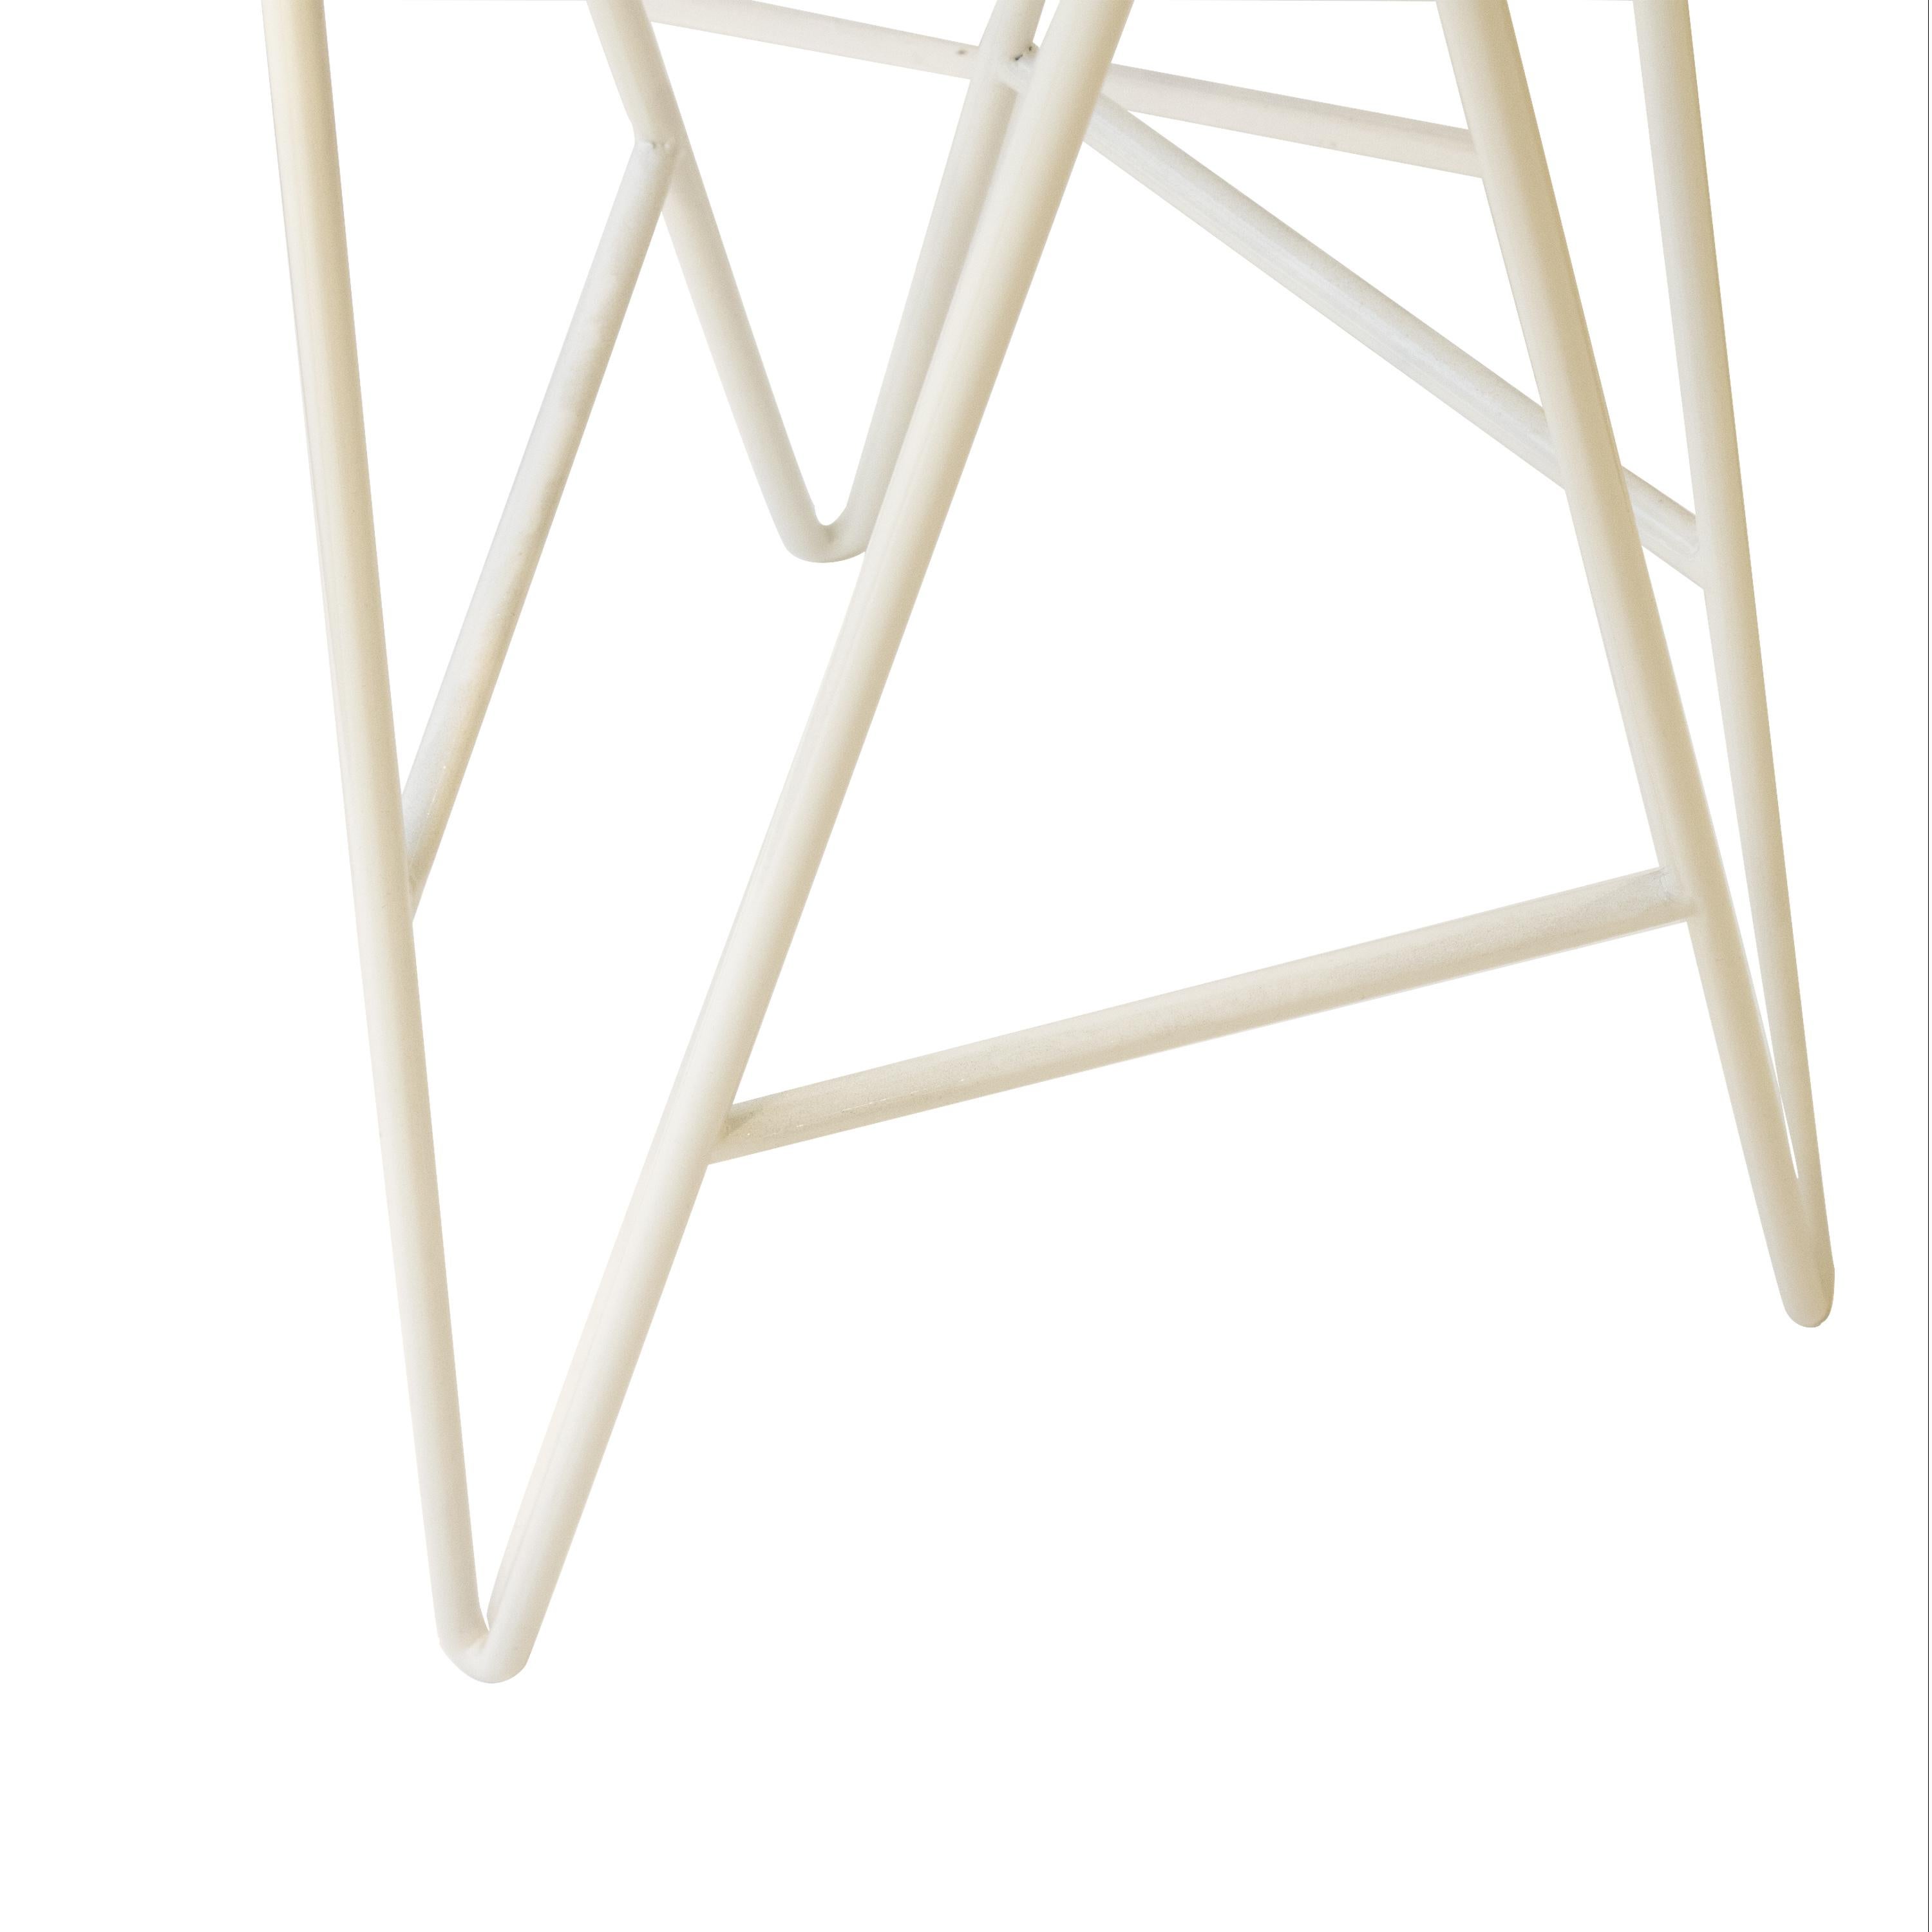 Contemporary Steel Stool Designed By IKB191 with Geometric Pattaron, Spain 2022.